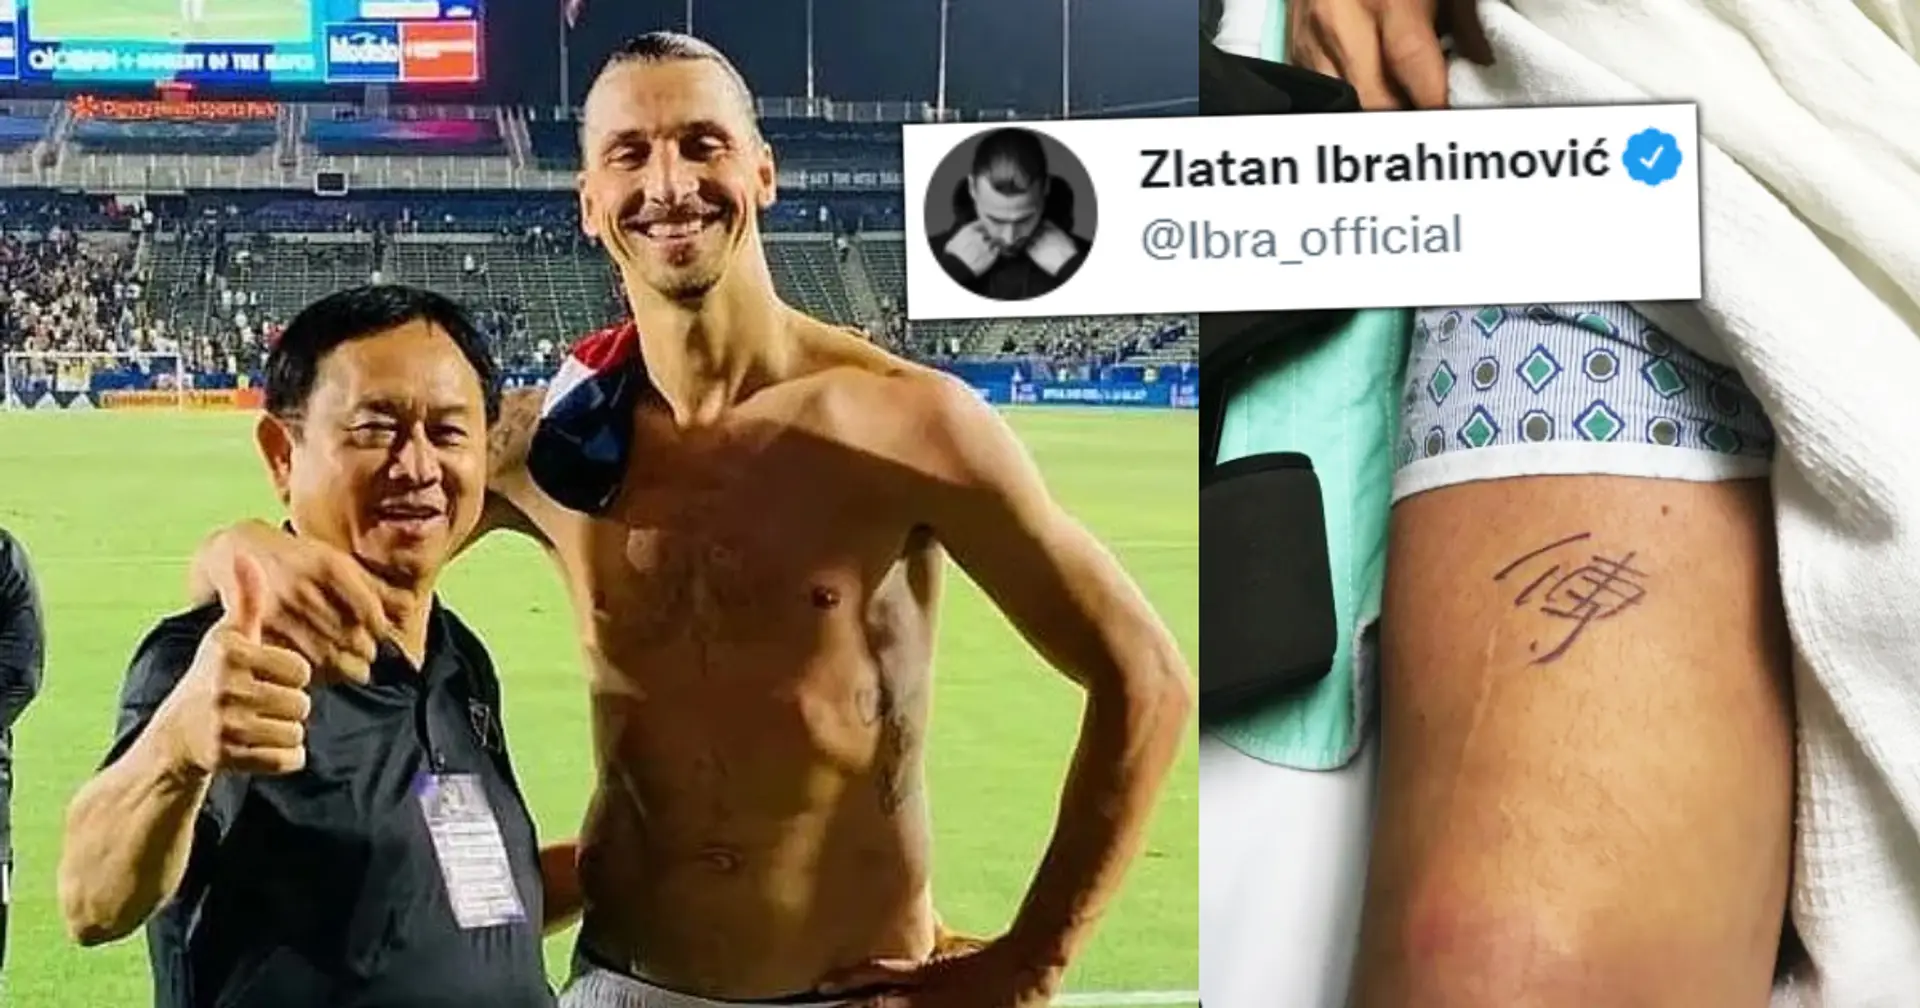 Why Zlatan dedicated tattoo to man next to him in latest post – explained